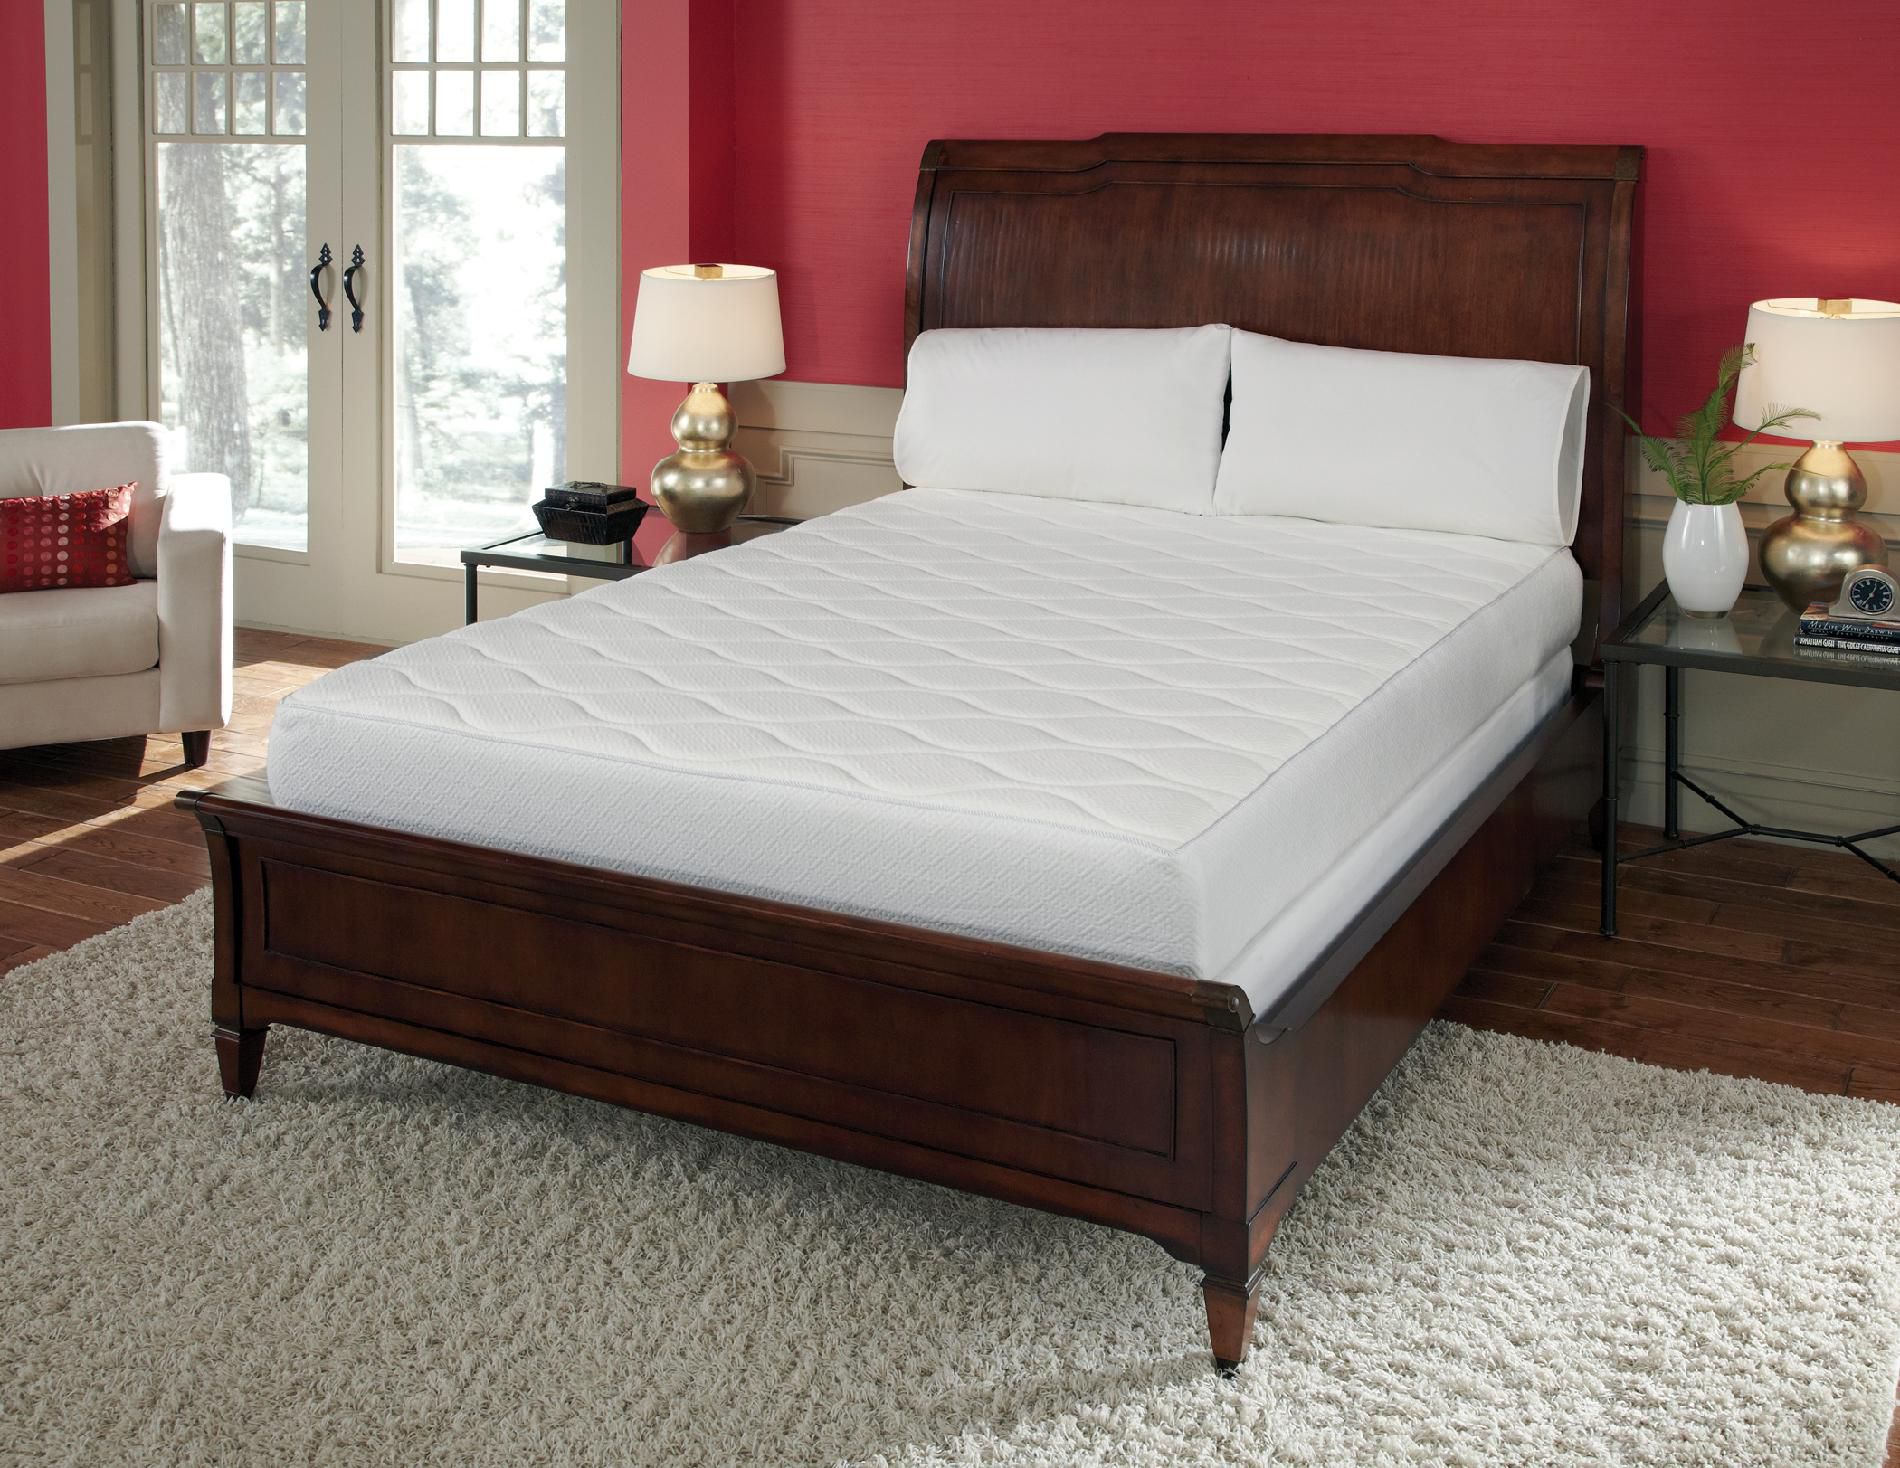 Pure Rest 10 inch Top Quilted Memory Foam Mattress: King Size 10